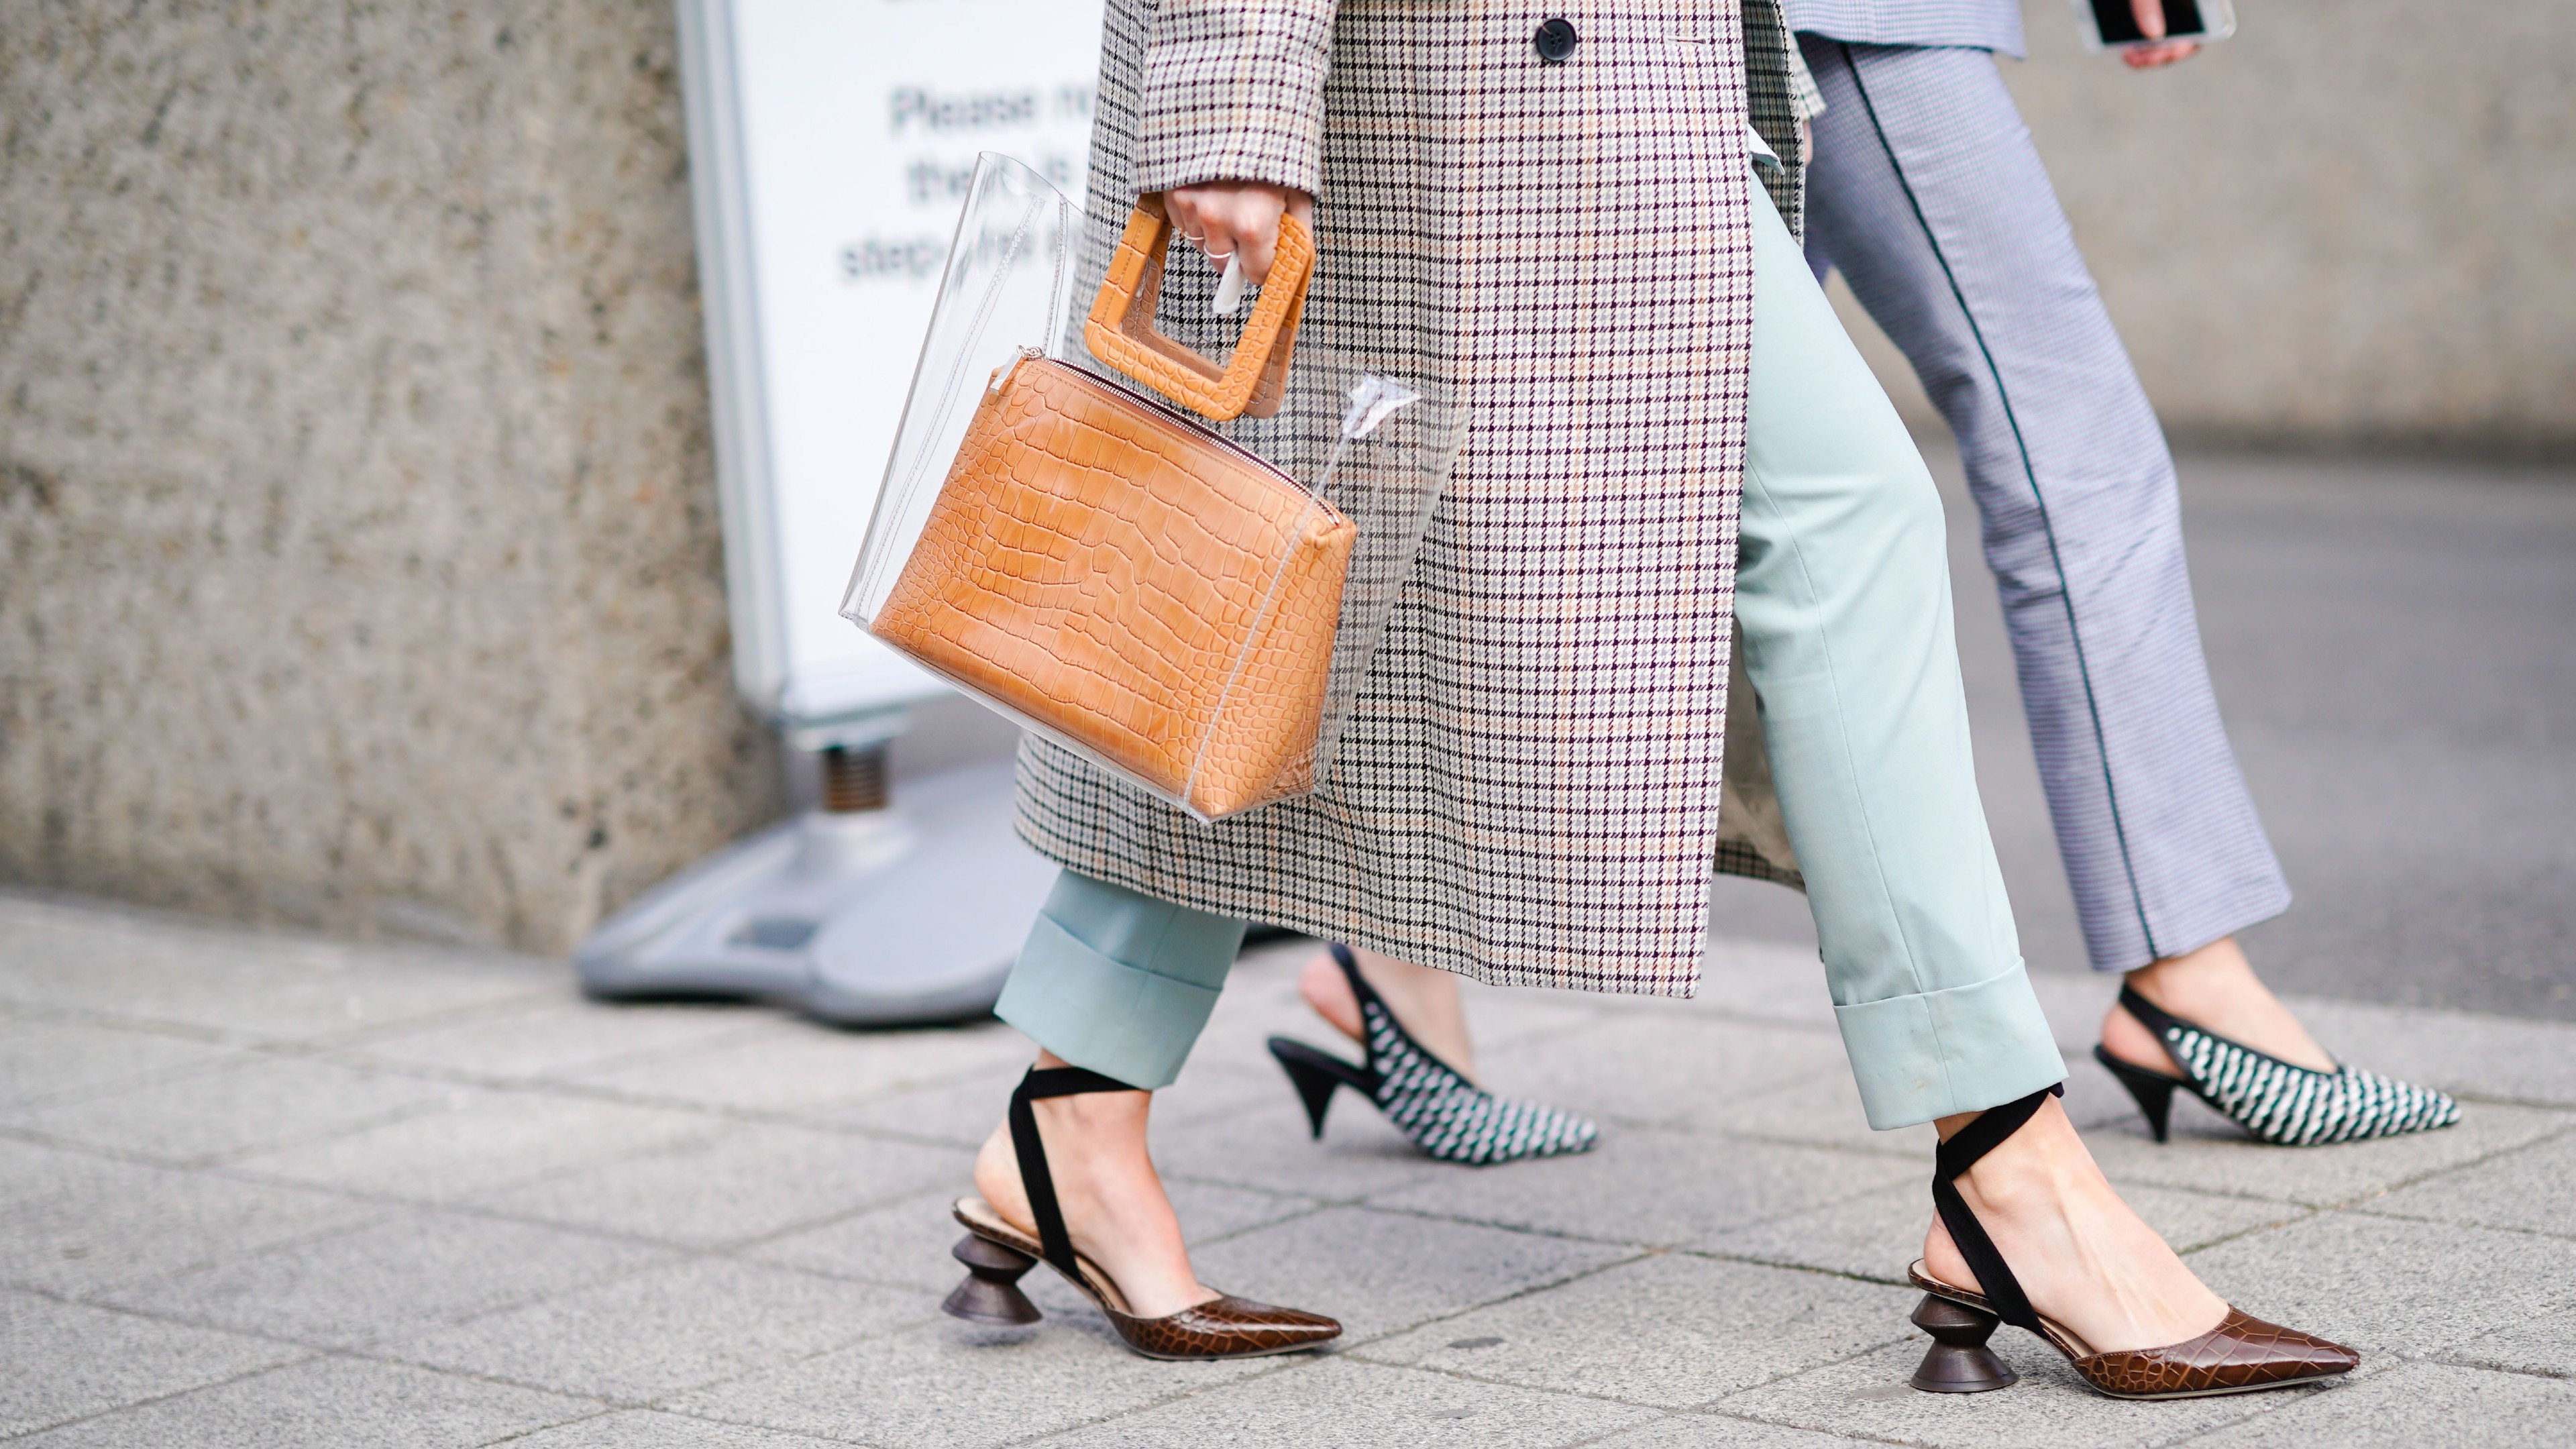 Kronisk lække Mug The Most Comfortable Heels, According to a Podiatrist | Marie Claire